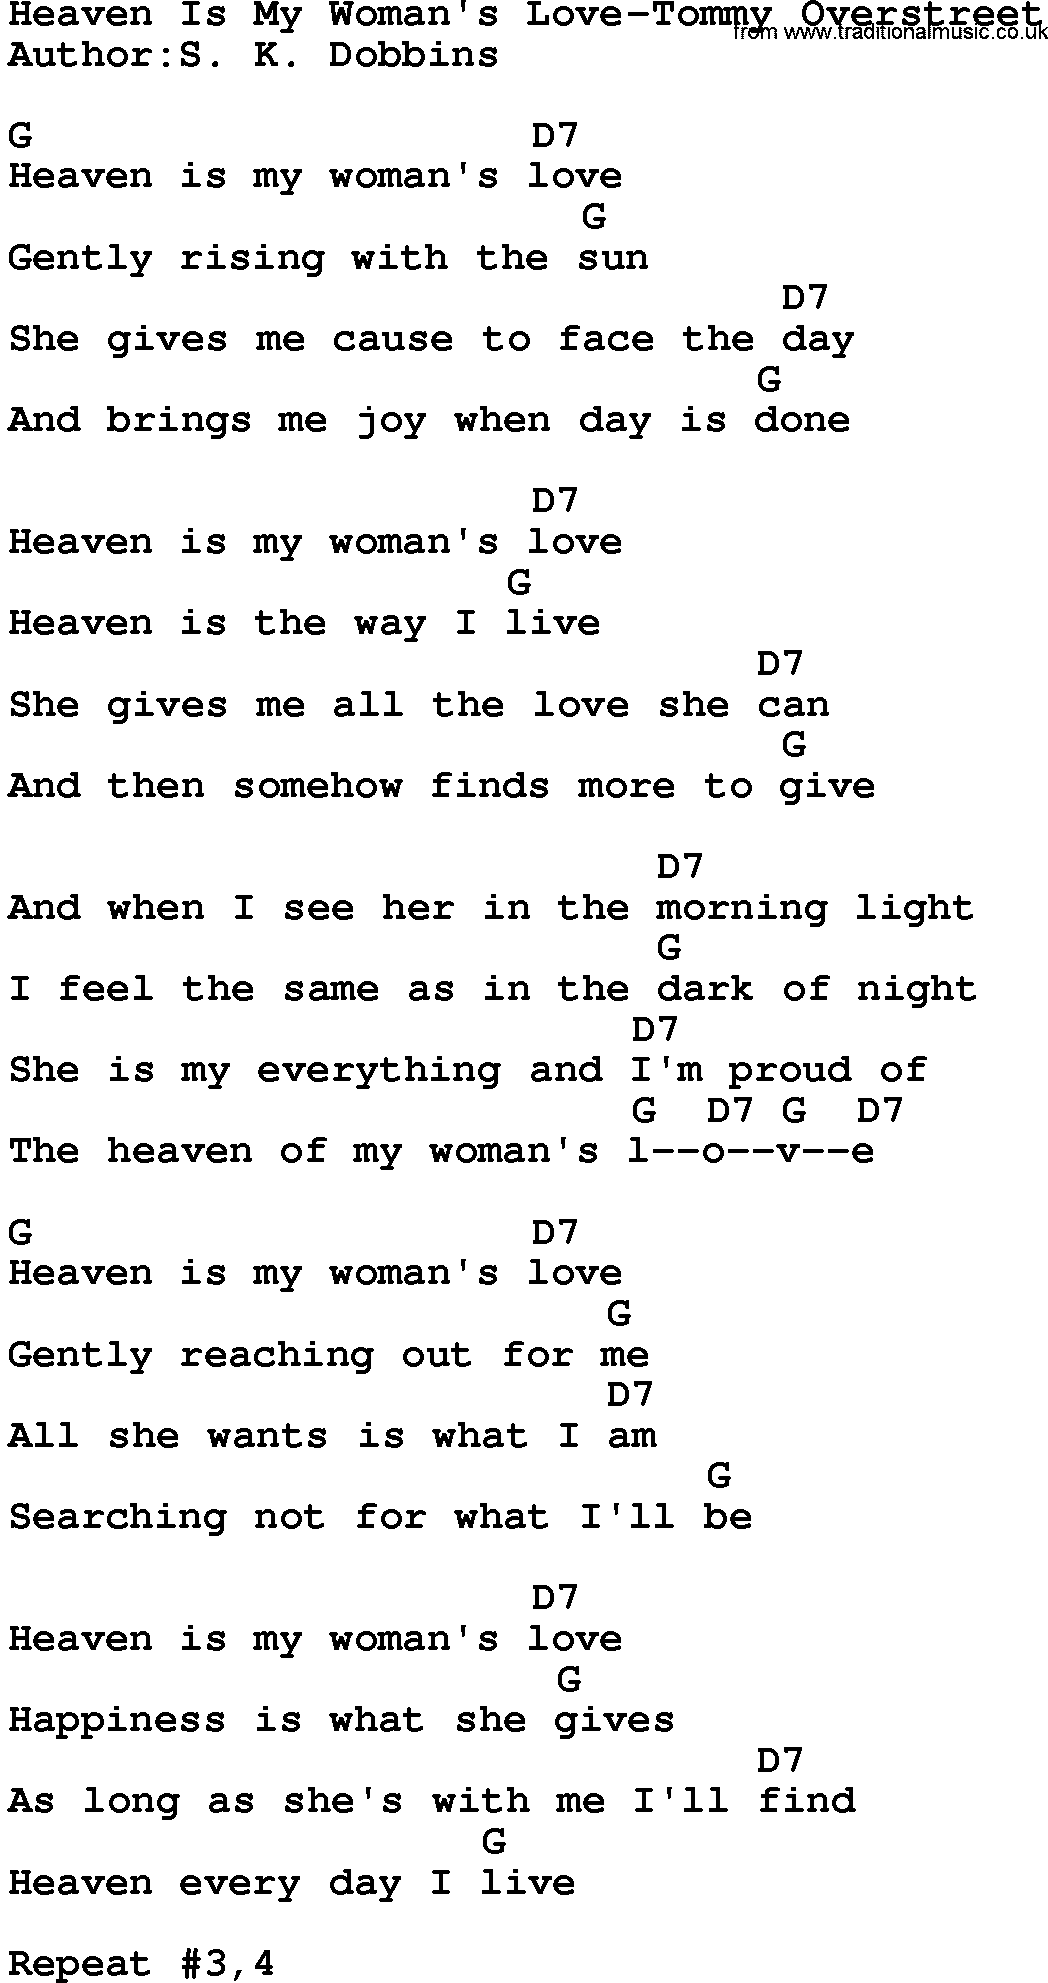 Country music song: Heaven Is My Woman's Love-Tommy Overstreet lyrics and chords